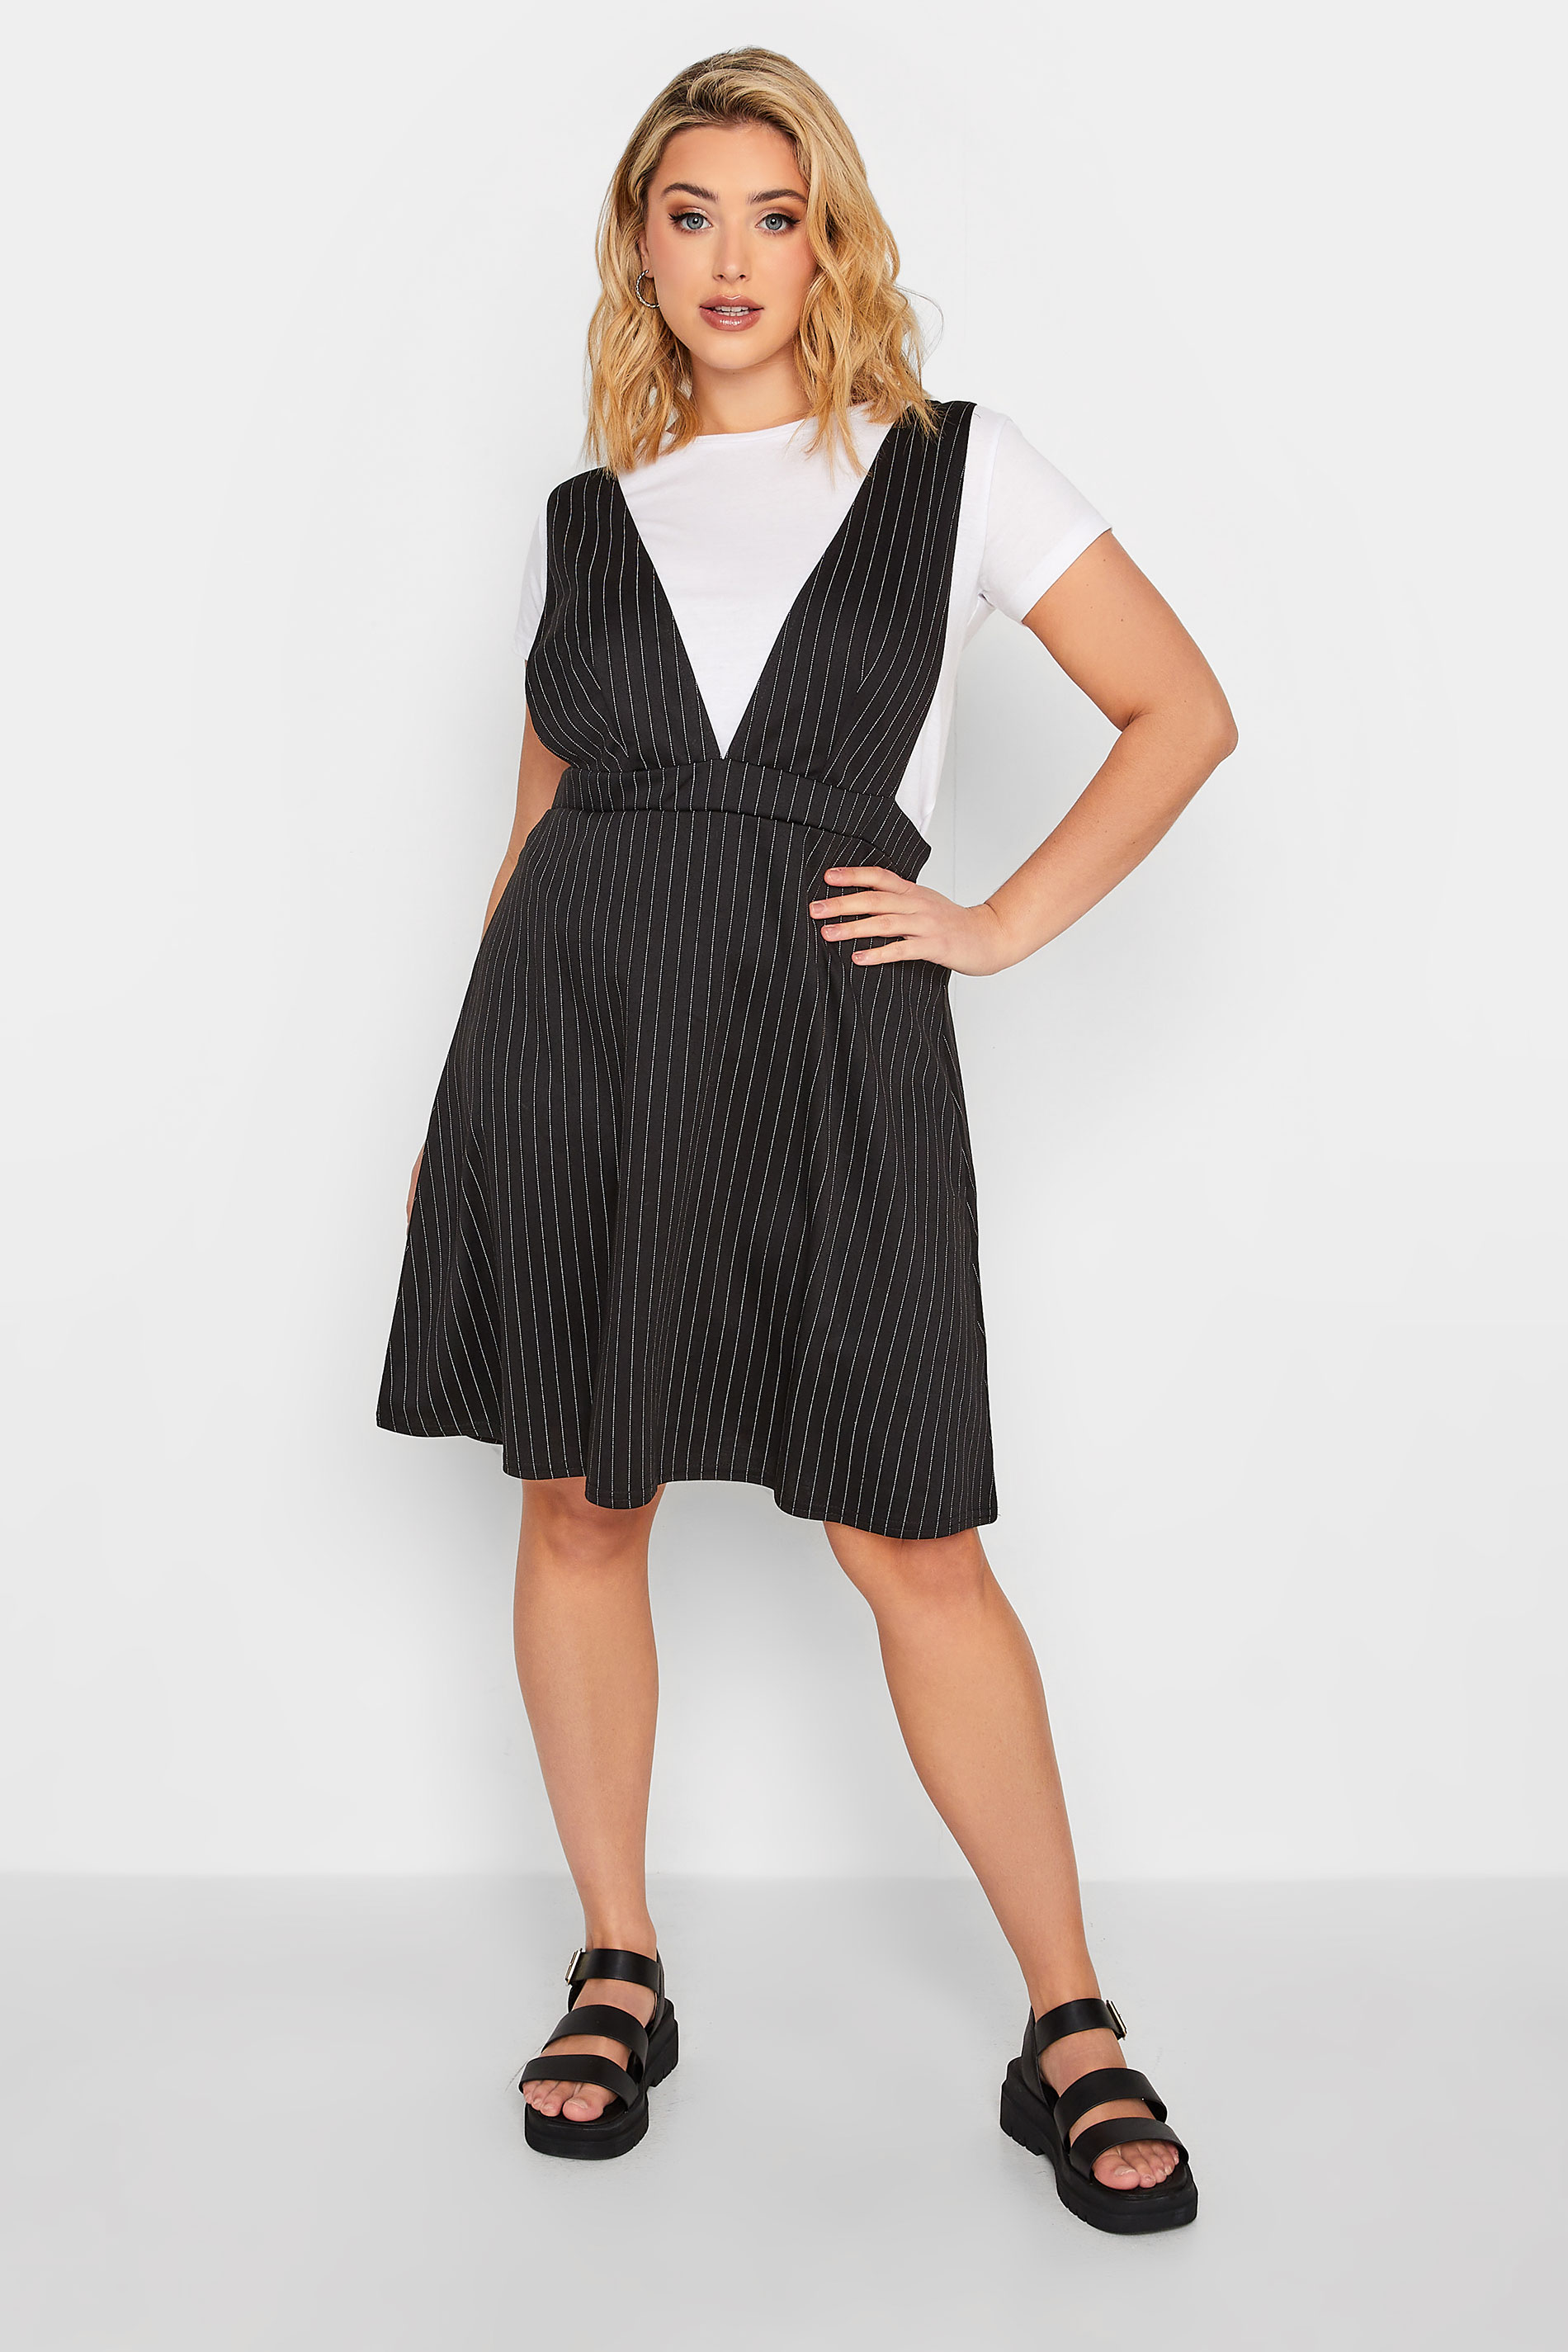 LIMITED COLLECTION Plus Size Black Pinstripe Pinafore Dress | Yours Clothing 1